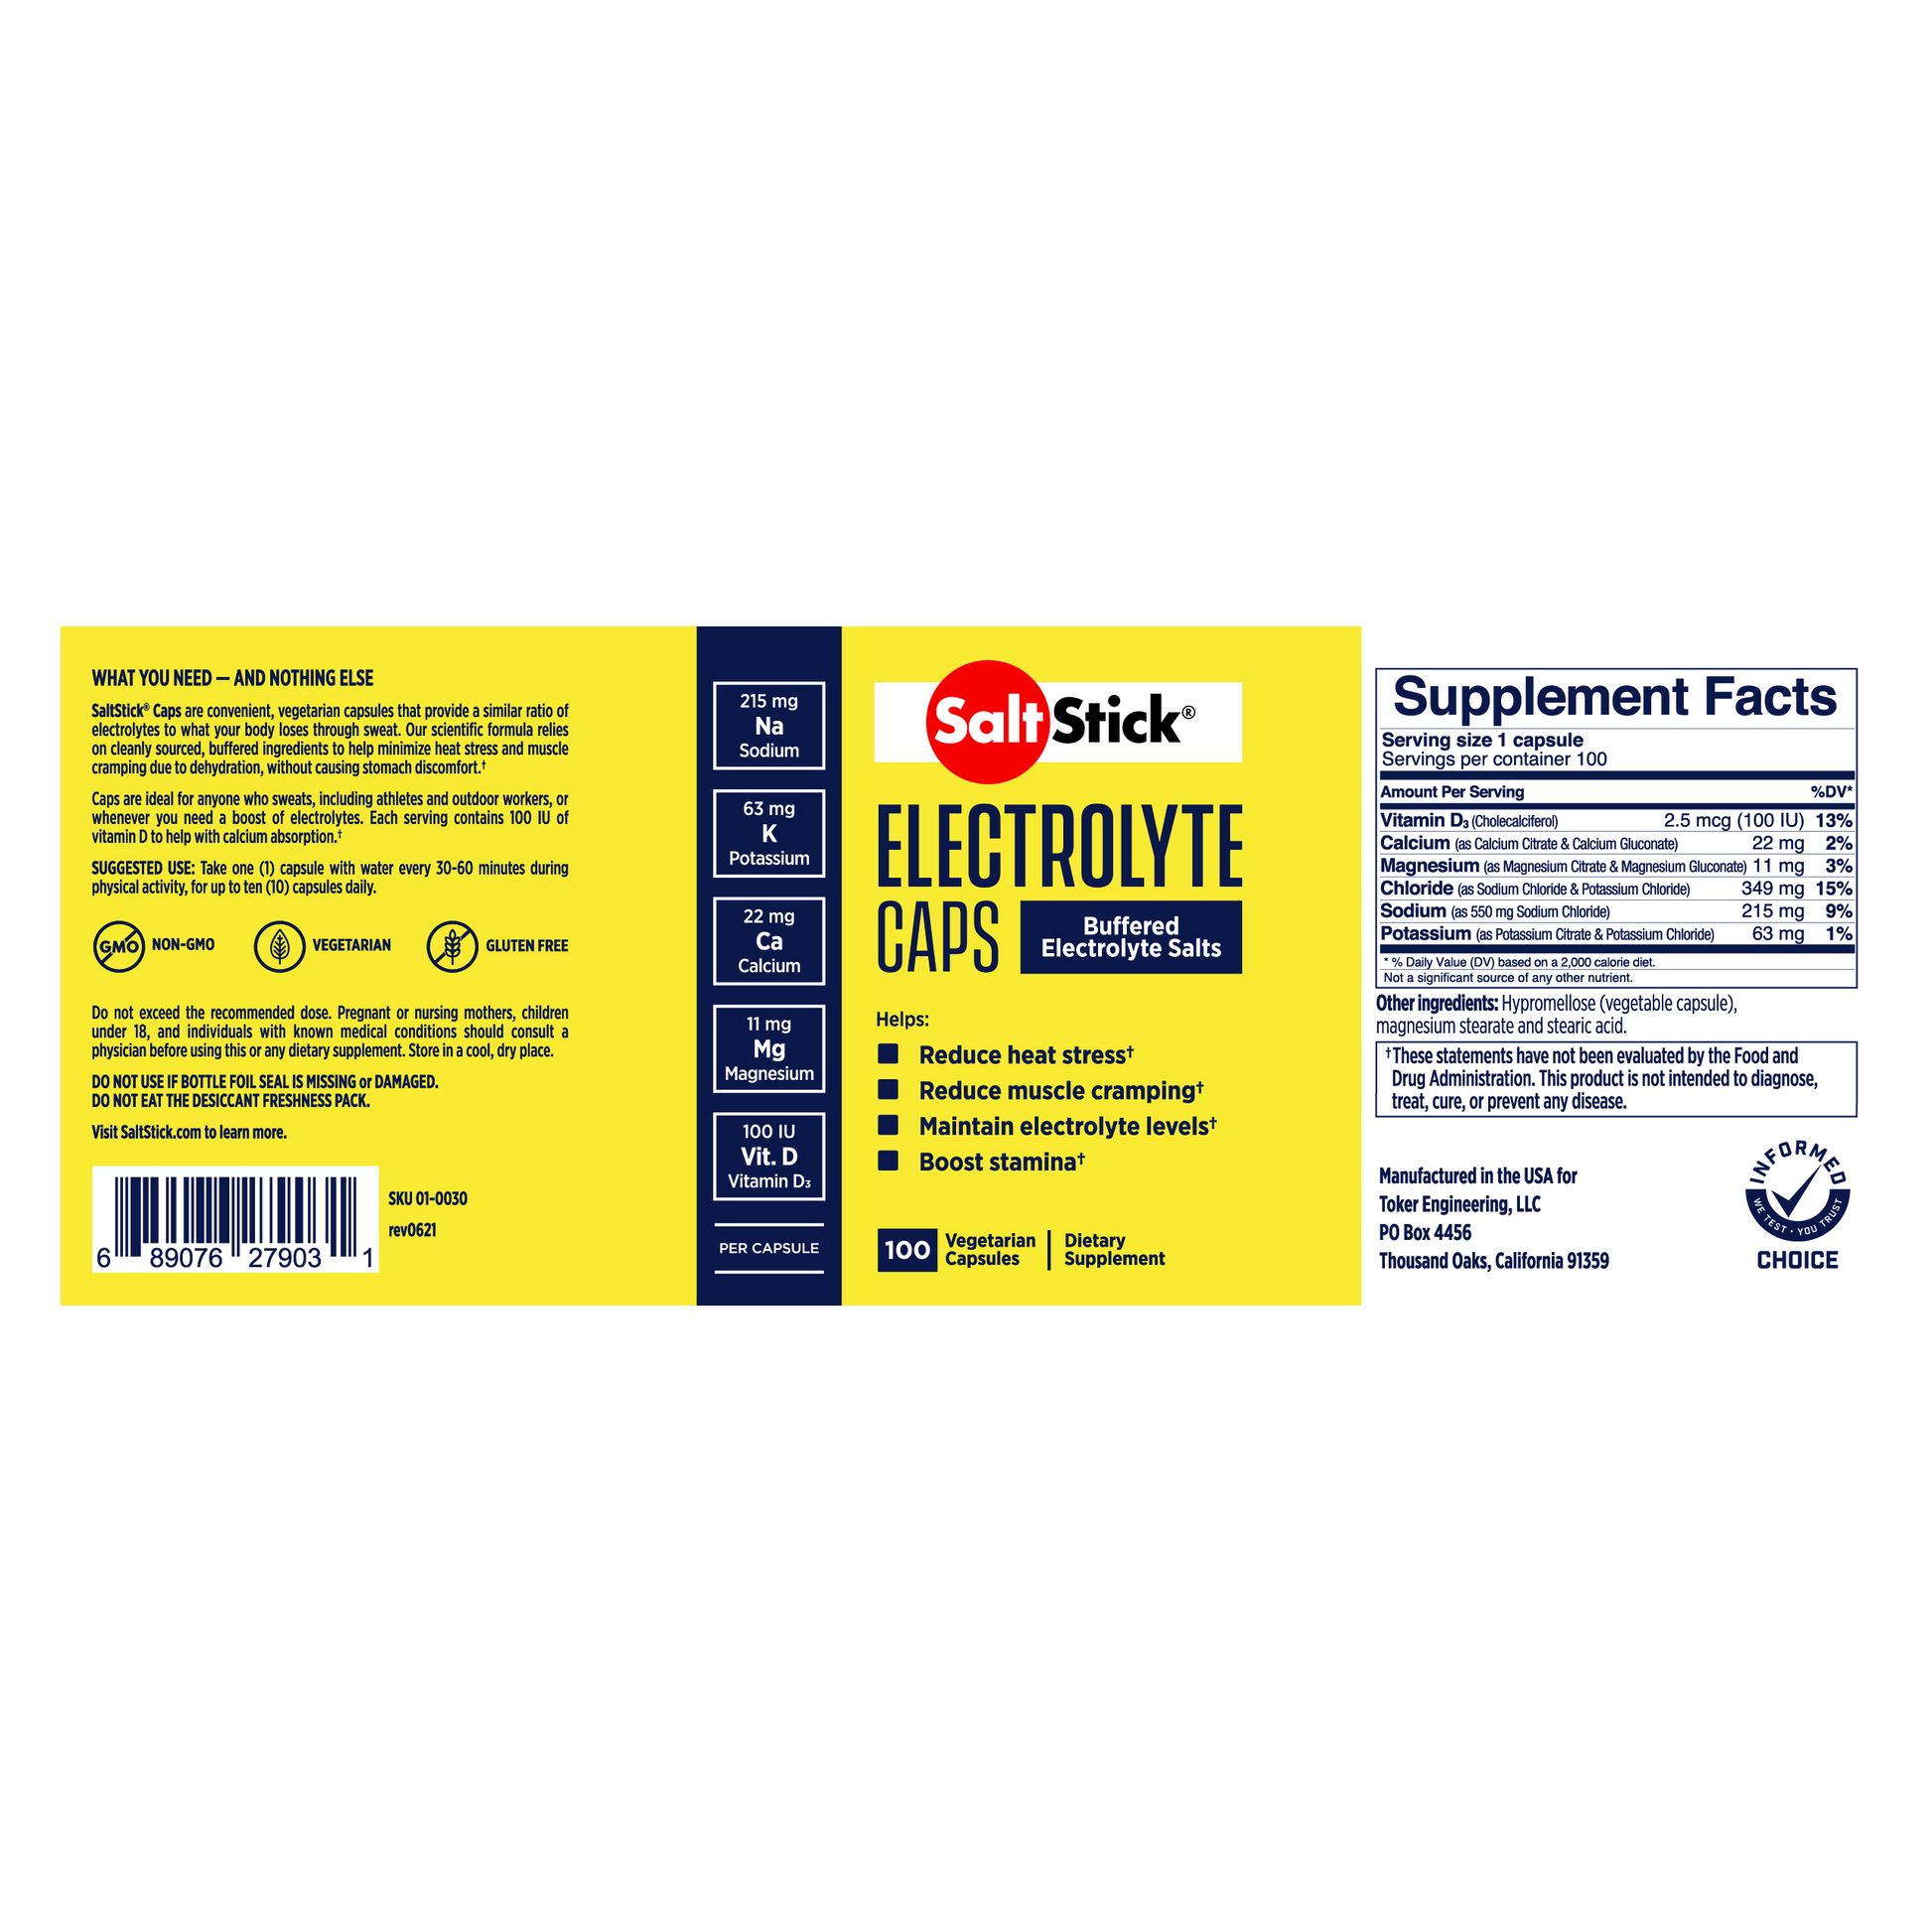 SaltStick Electrolyte Capsules Bottle of 100 Supplement Facts